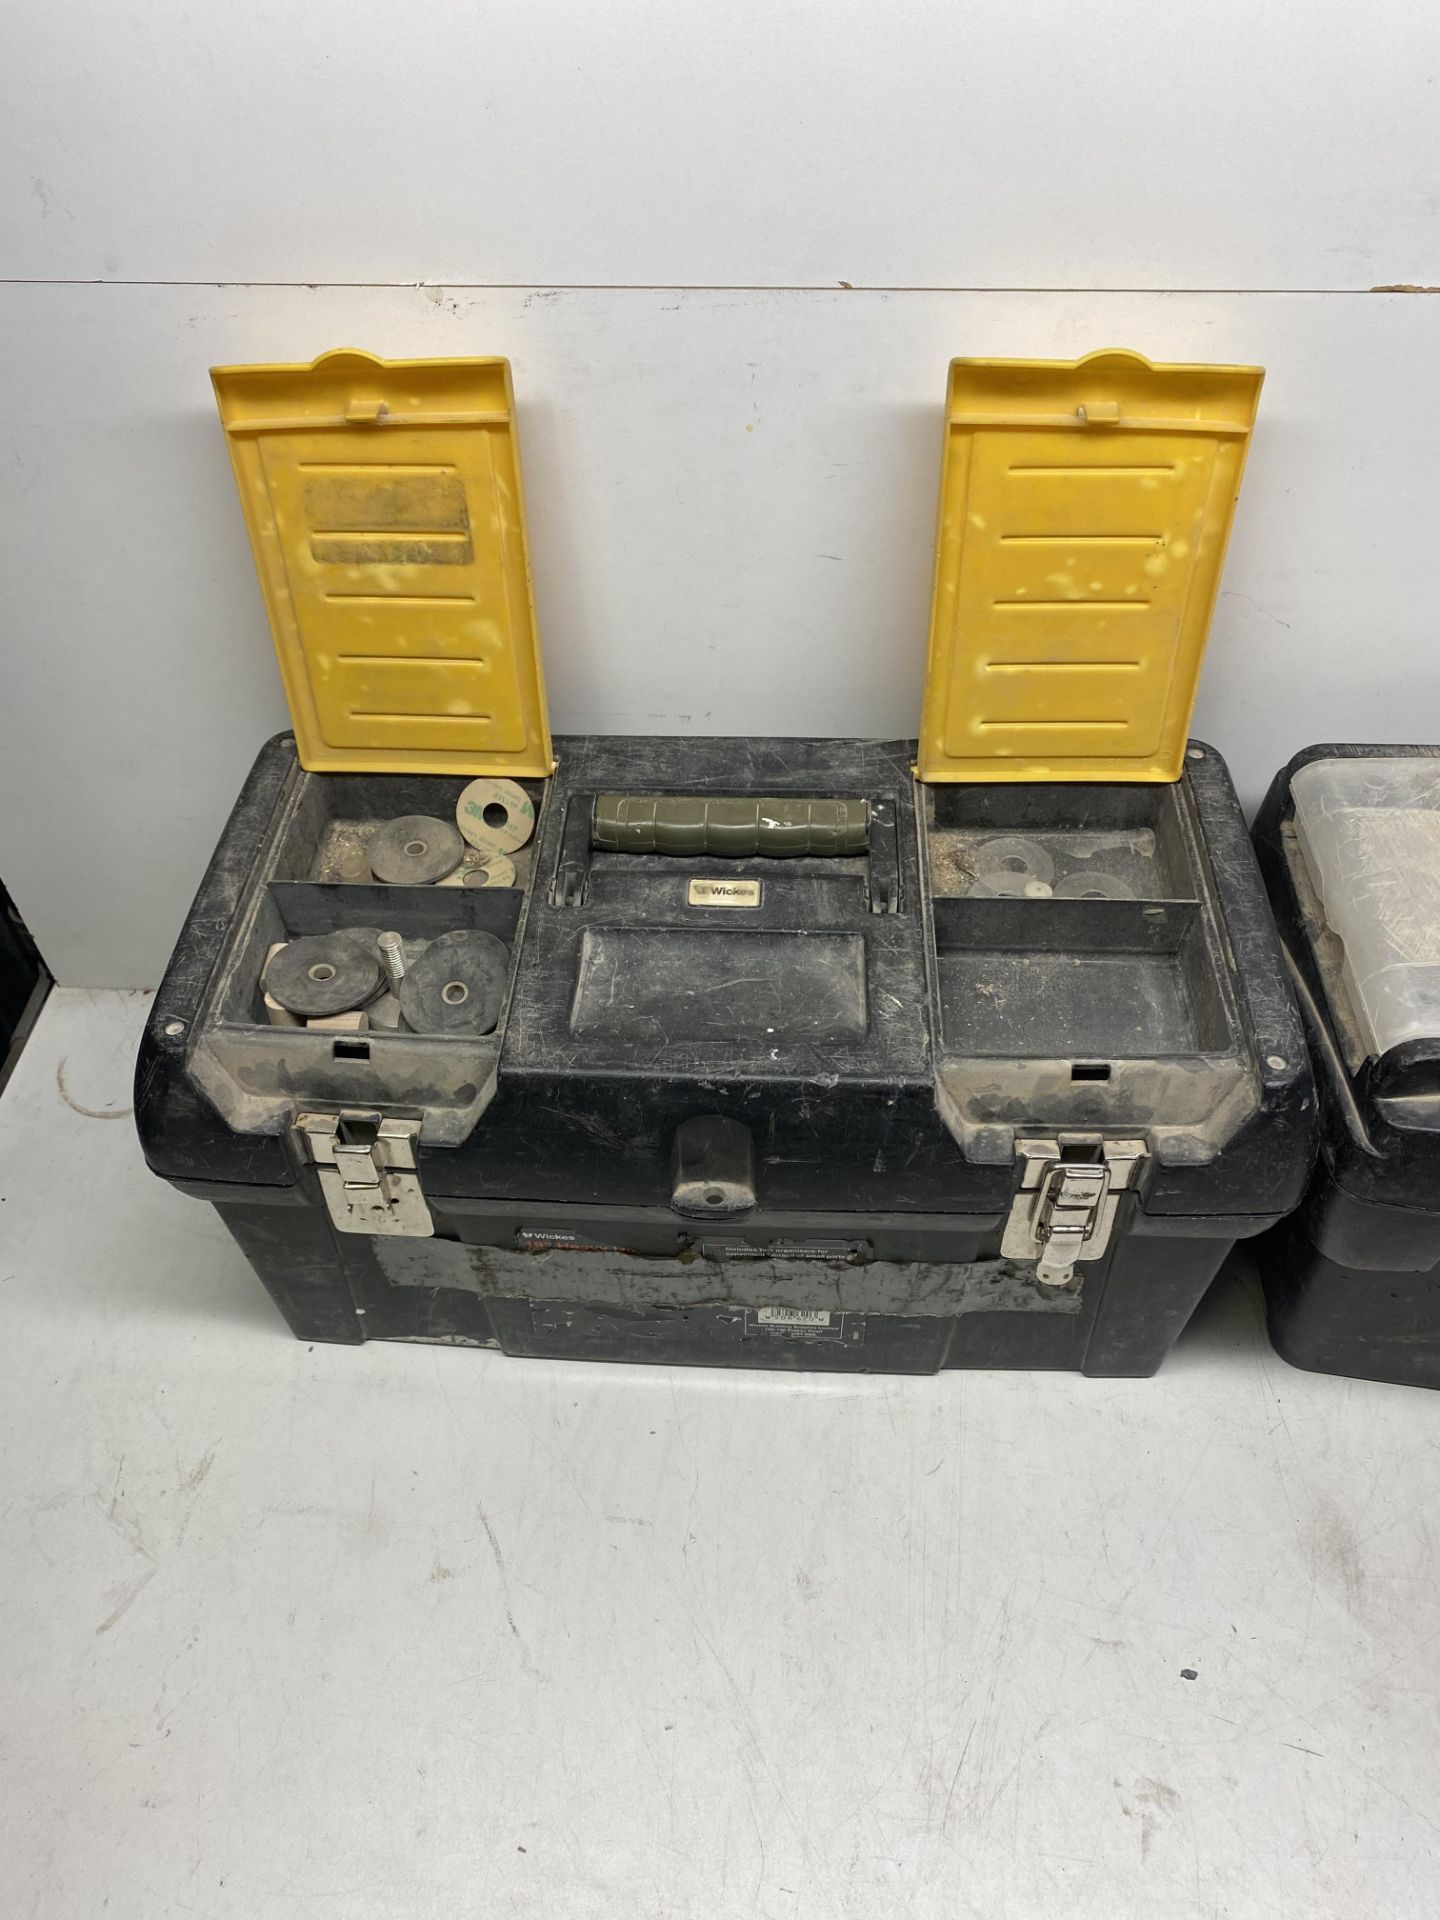 2 x Wickes Tool Boxes Including Contents As Seen In Photos - Image 7 of 8